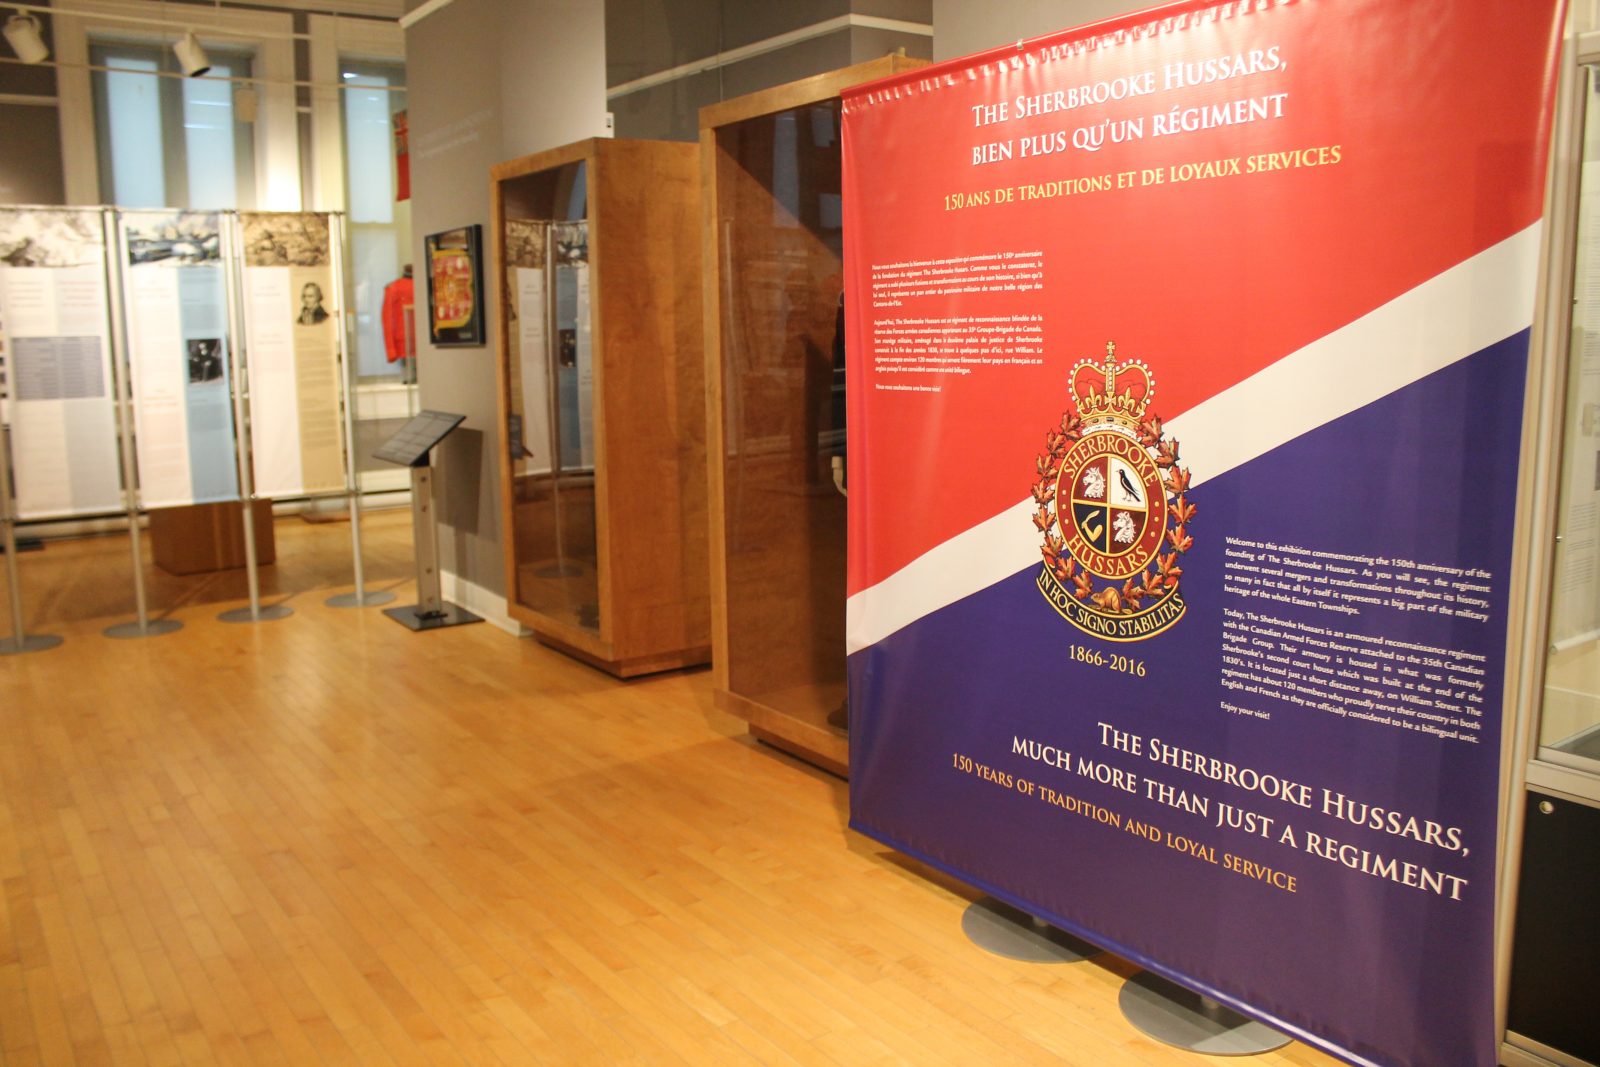 New exhibit celebrates 150 years of the Sherbrooke Hussars